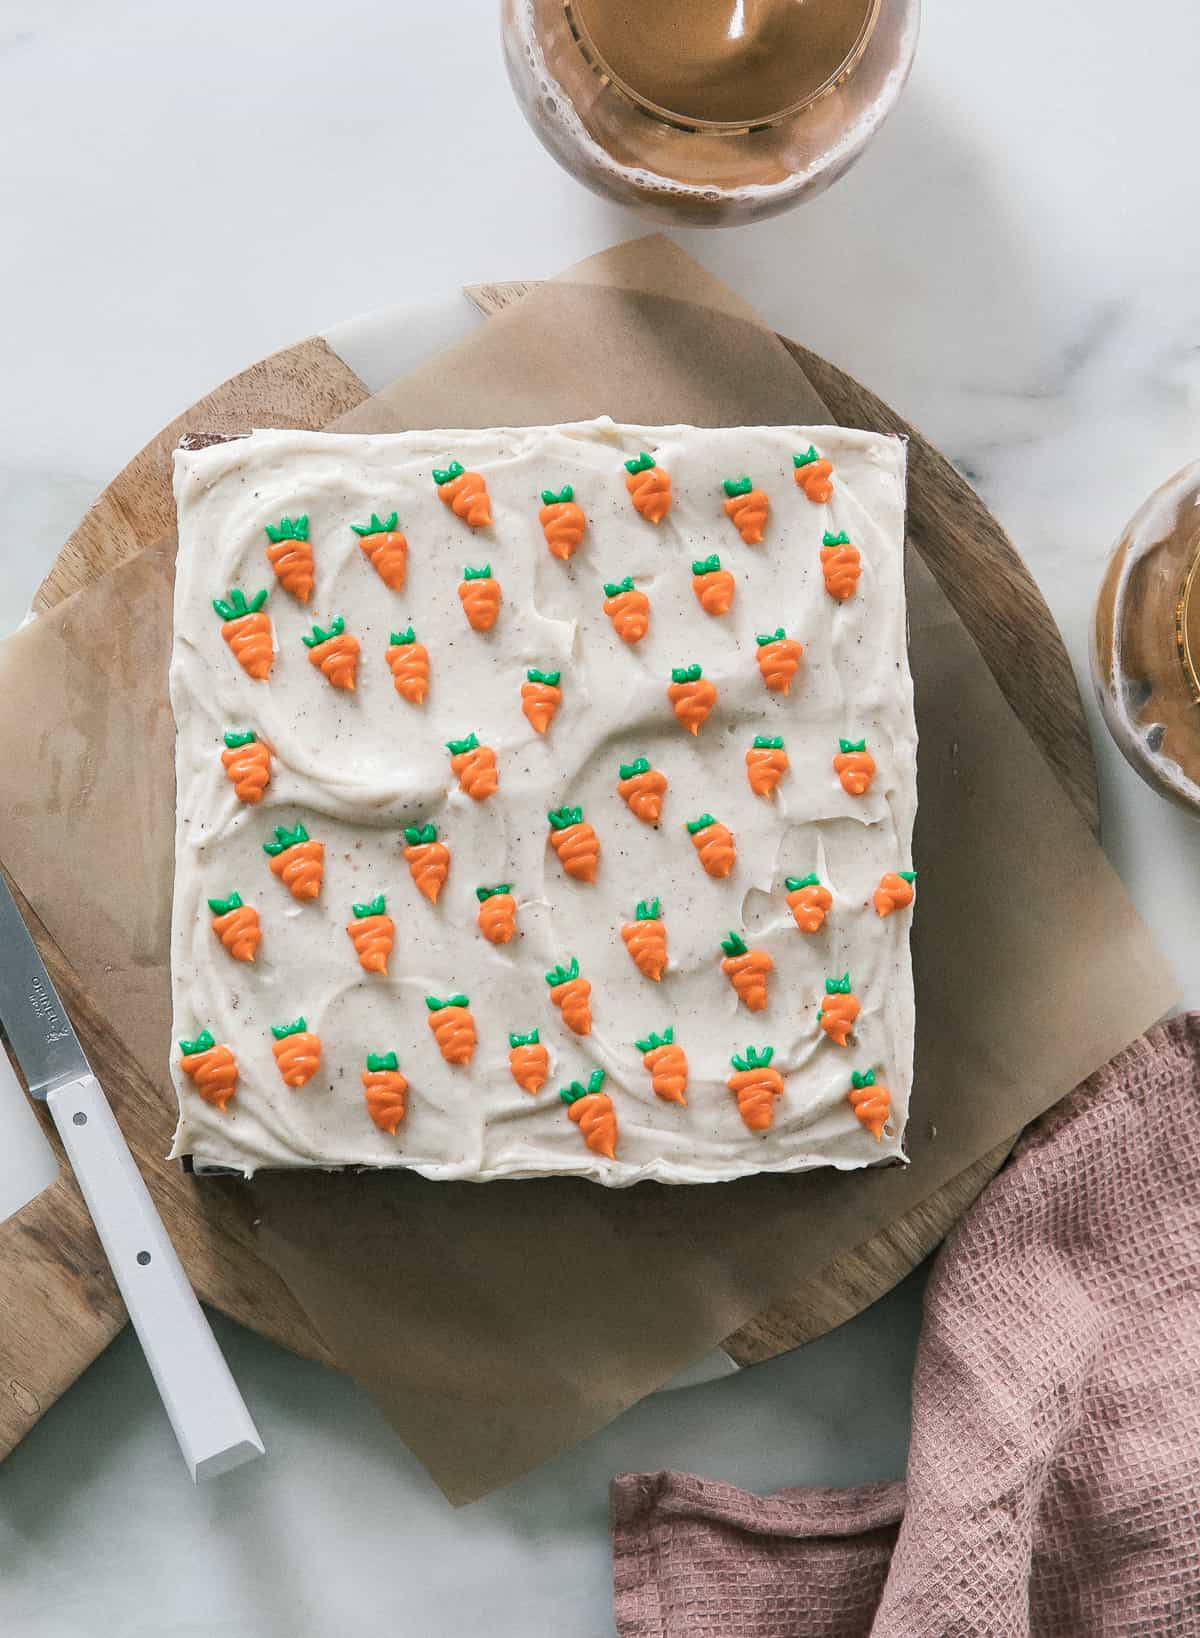 Carrot cake topped with piped on carrots on a cutting board